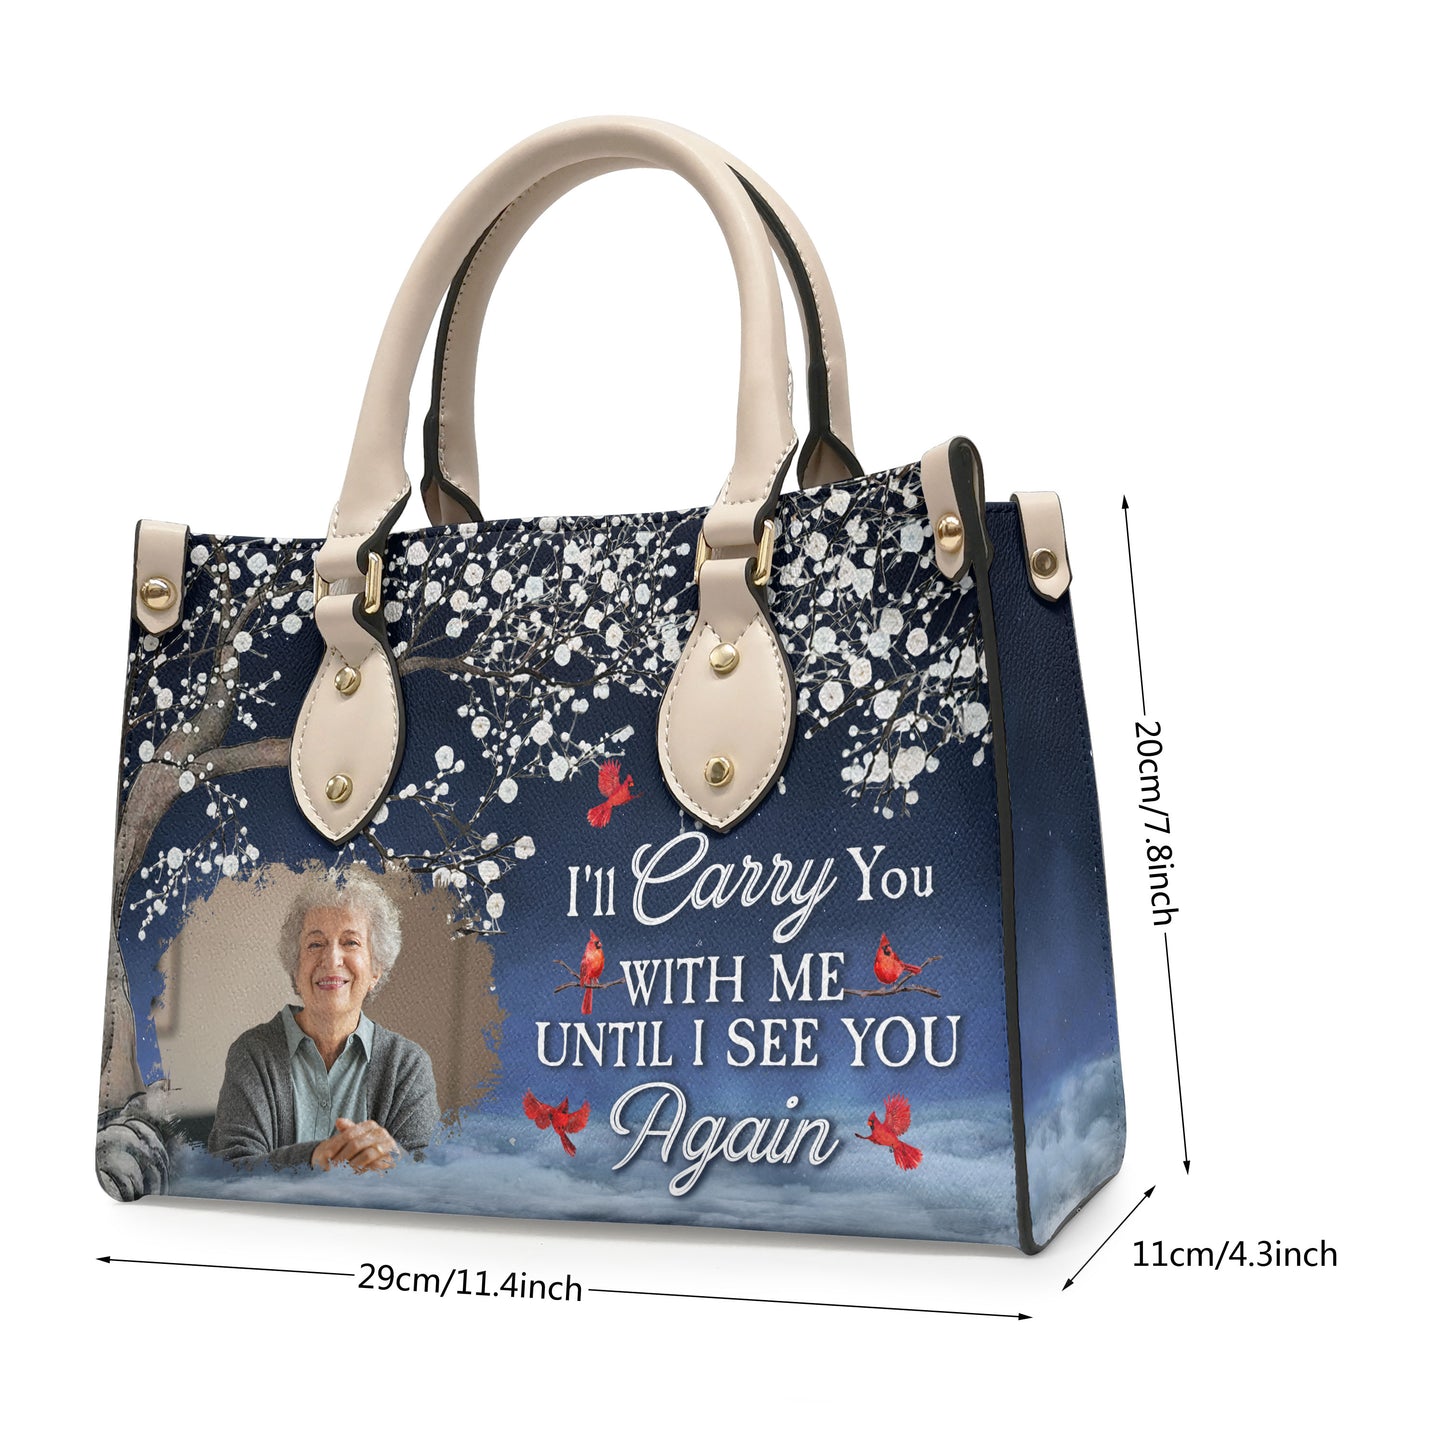 I Will Carry You With Me Until I See You Again - Personalized Leather Photo Bag